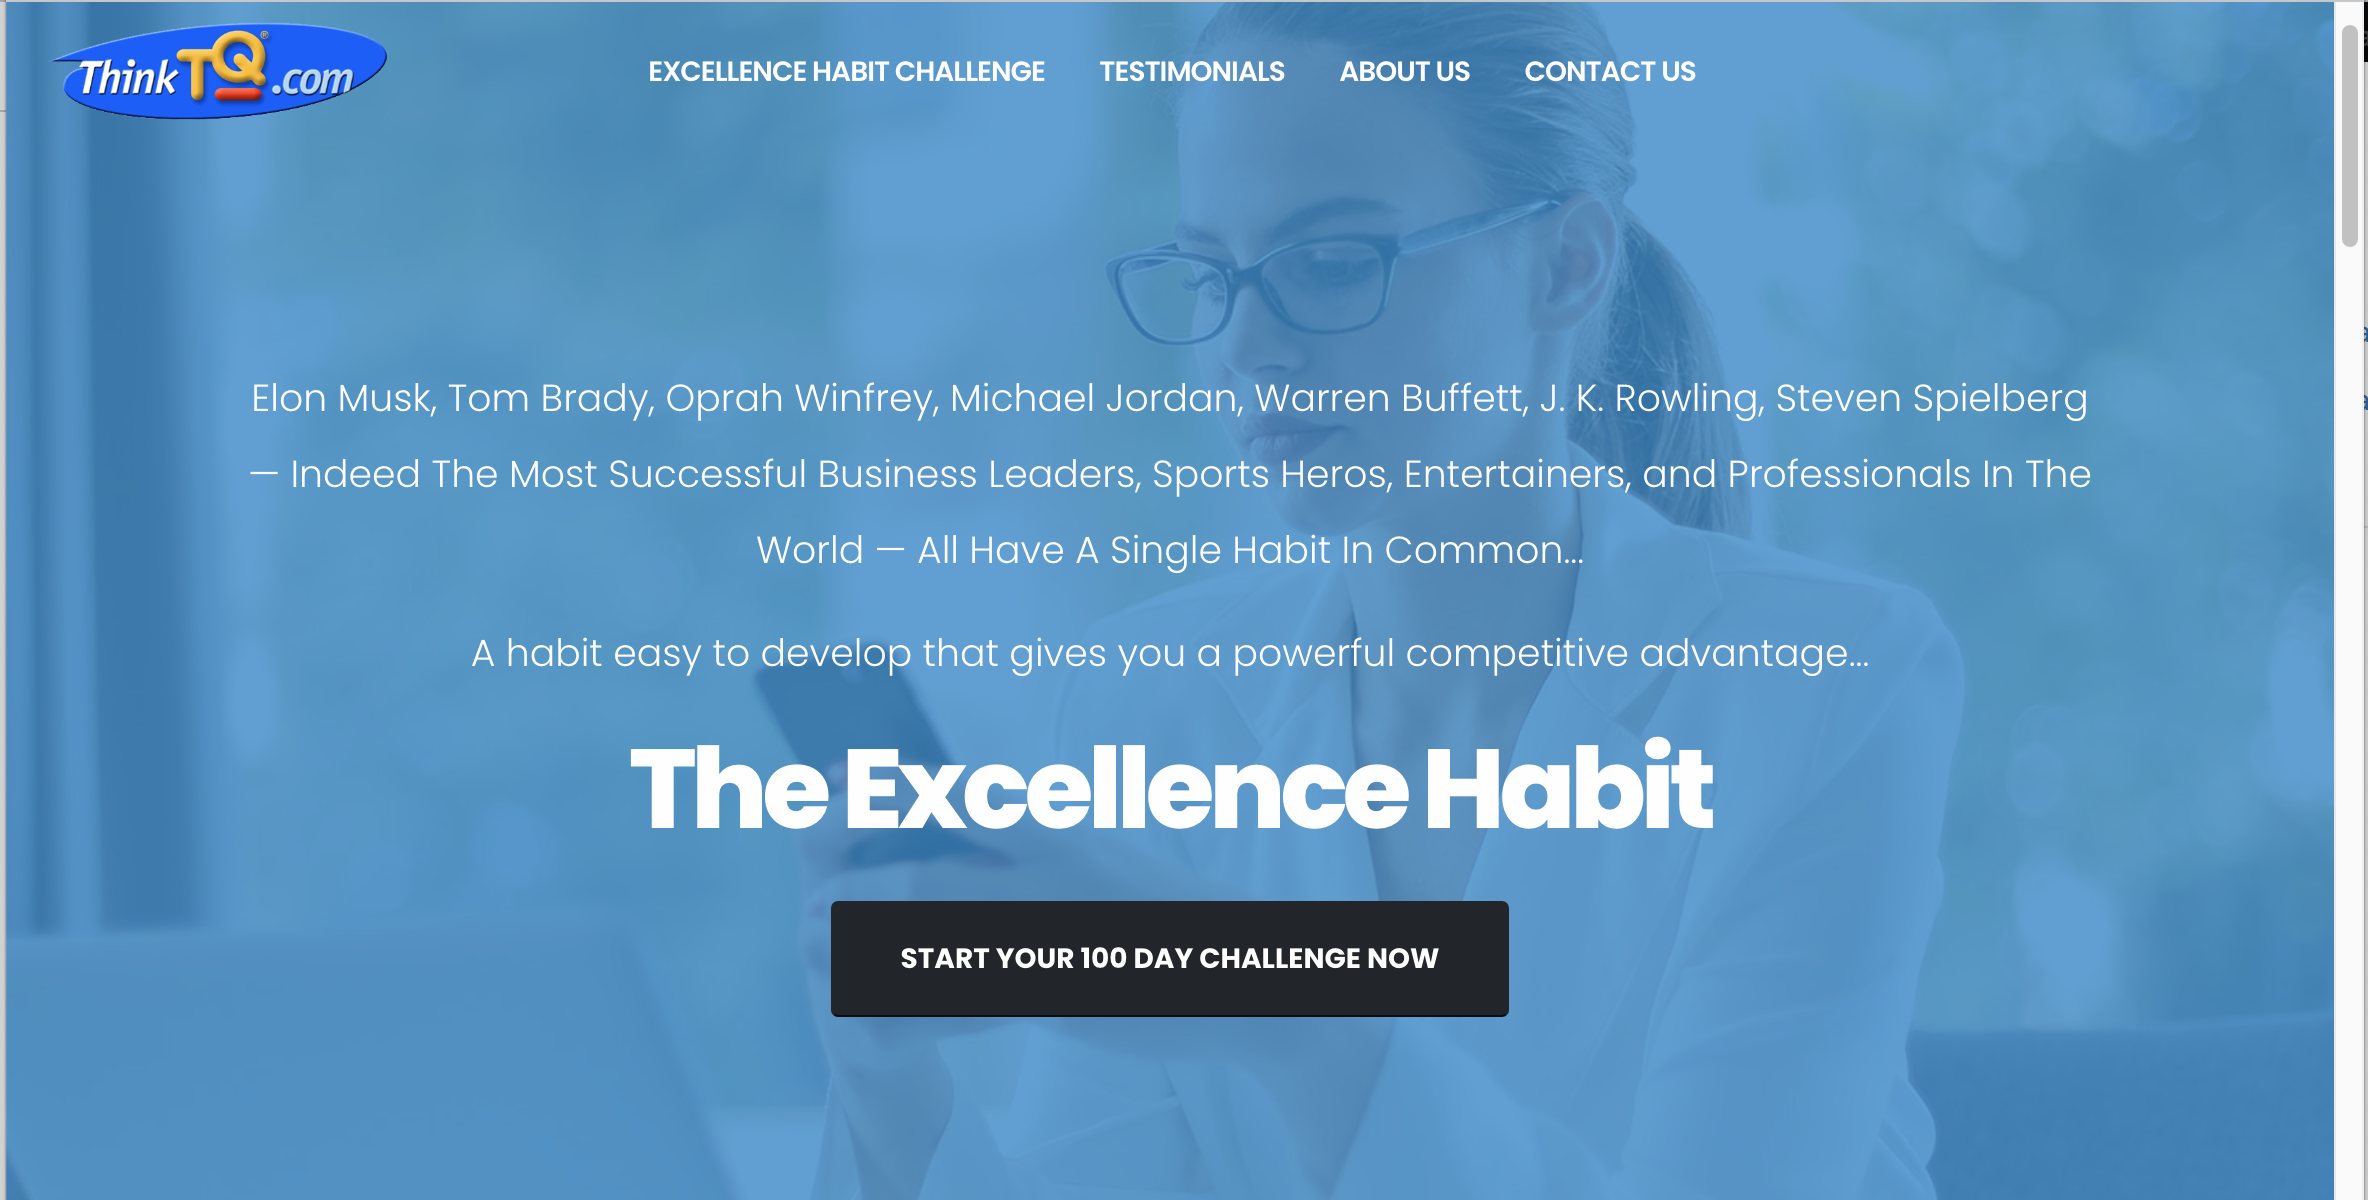 The Excellence Habit in a Time of Crisis